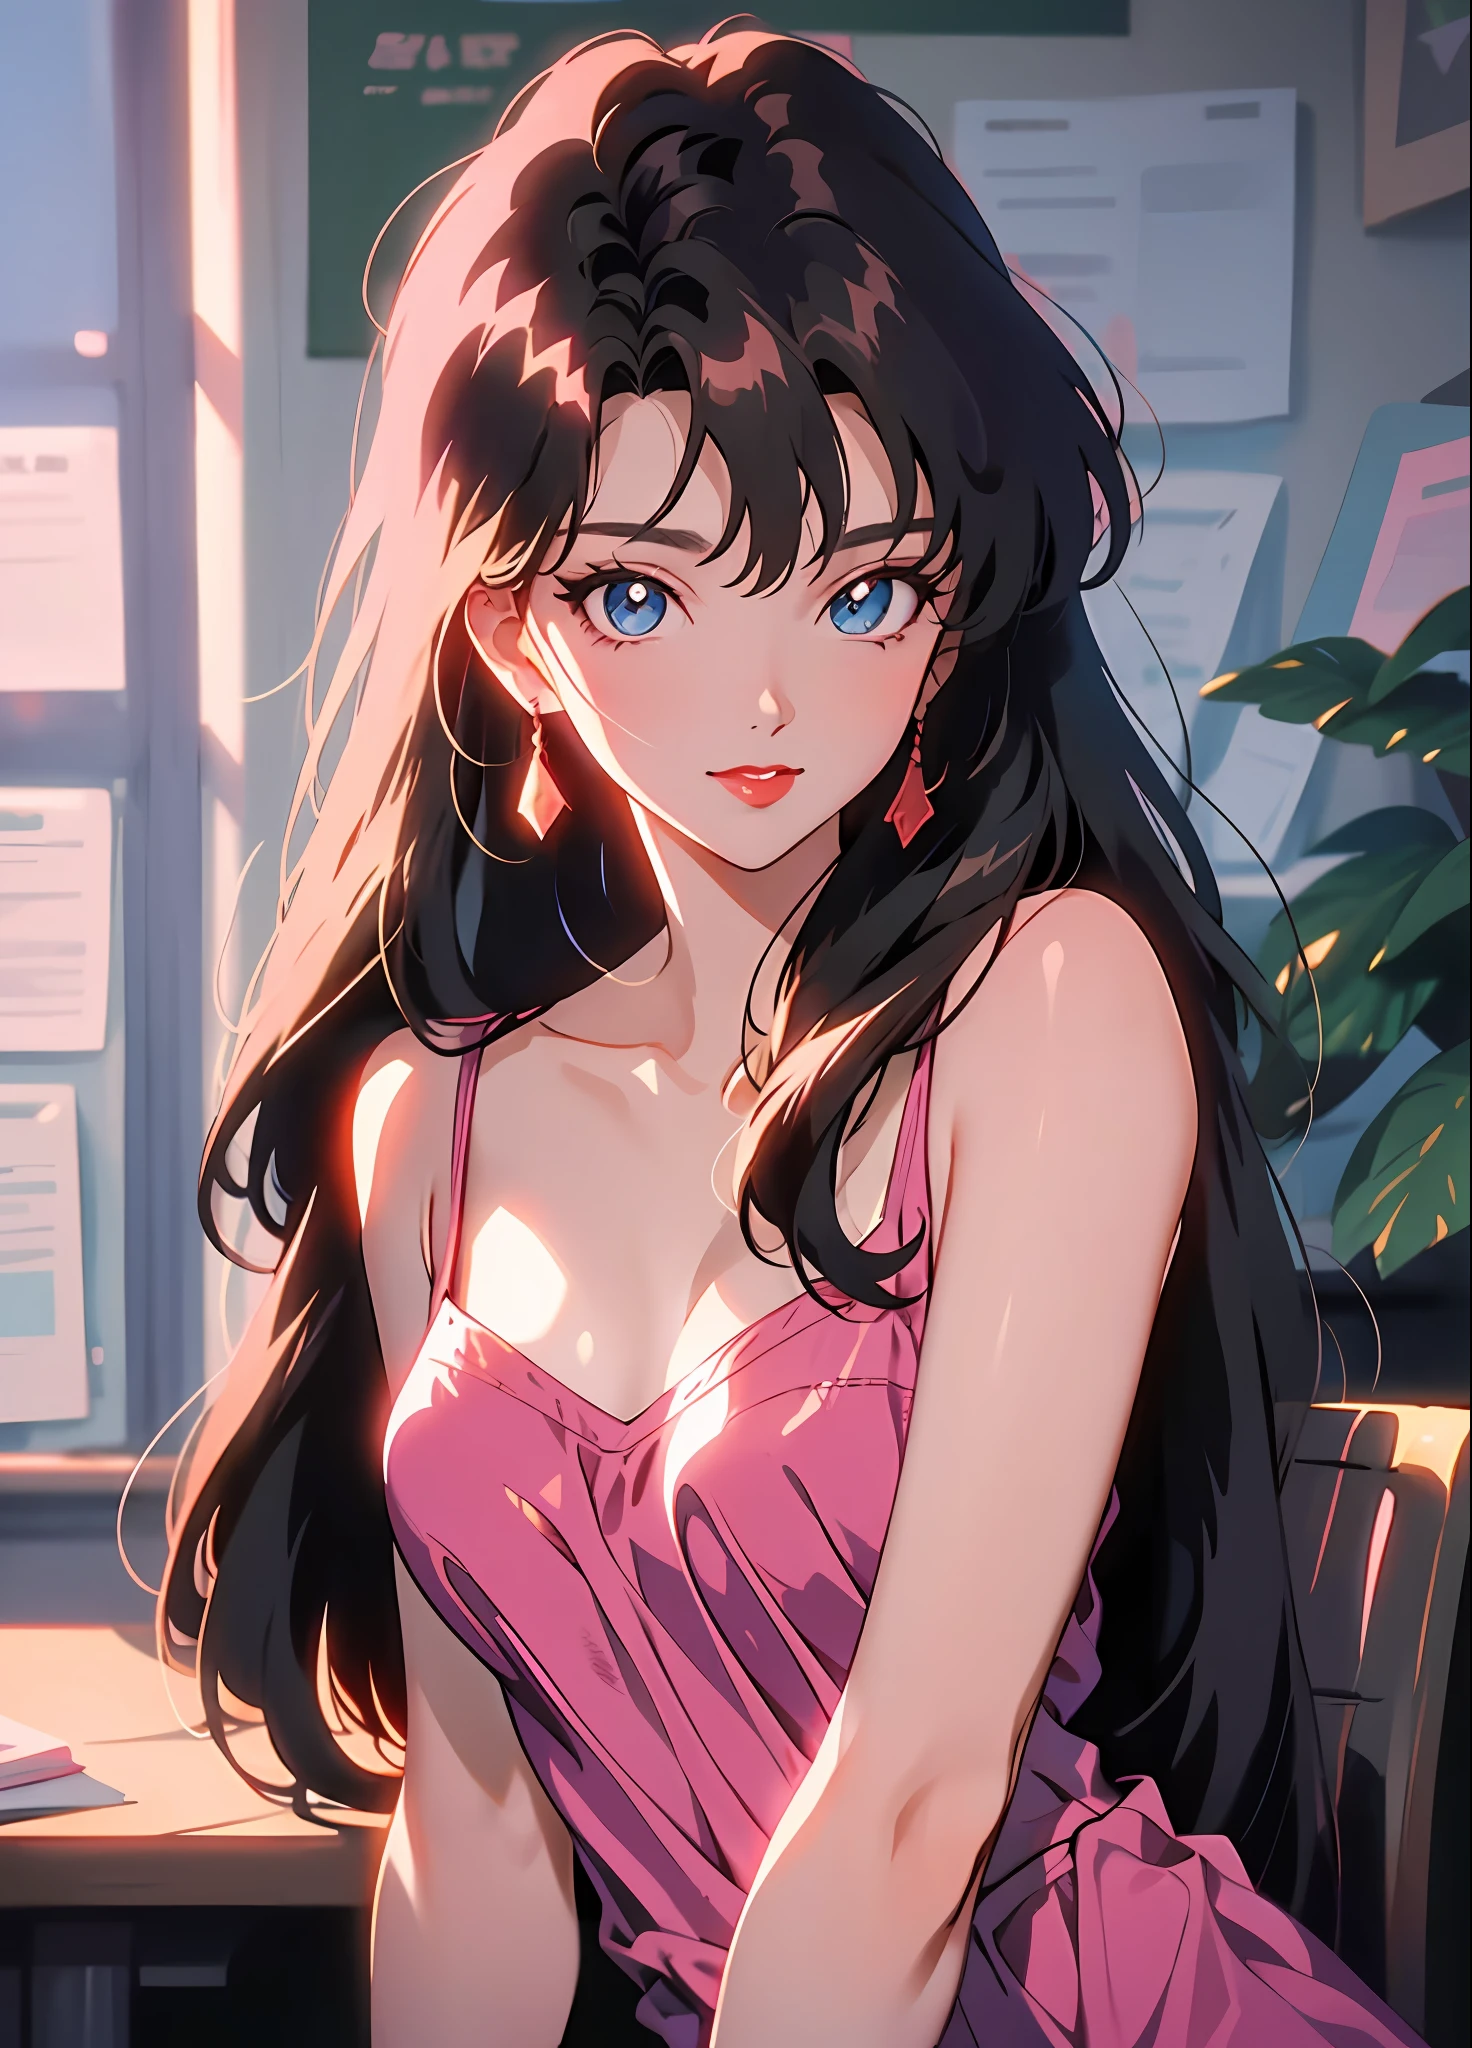 90's anime style，tmasterpiece，best qualityer，highest  quality，realisticlying，perfectanatomy，perfectface，Perfect eyes，long eyelasher，largeeyes，eye glass，red lips，lipstick，Business suit，1girll，solo，brunette color hair，shift dresses，eBlue eyes，shairband，（cabelos preto e longos），Pink dress，blacksilk，red hairband，exteriors, ssmile